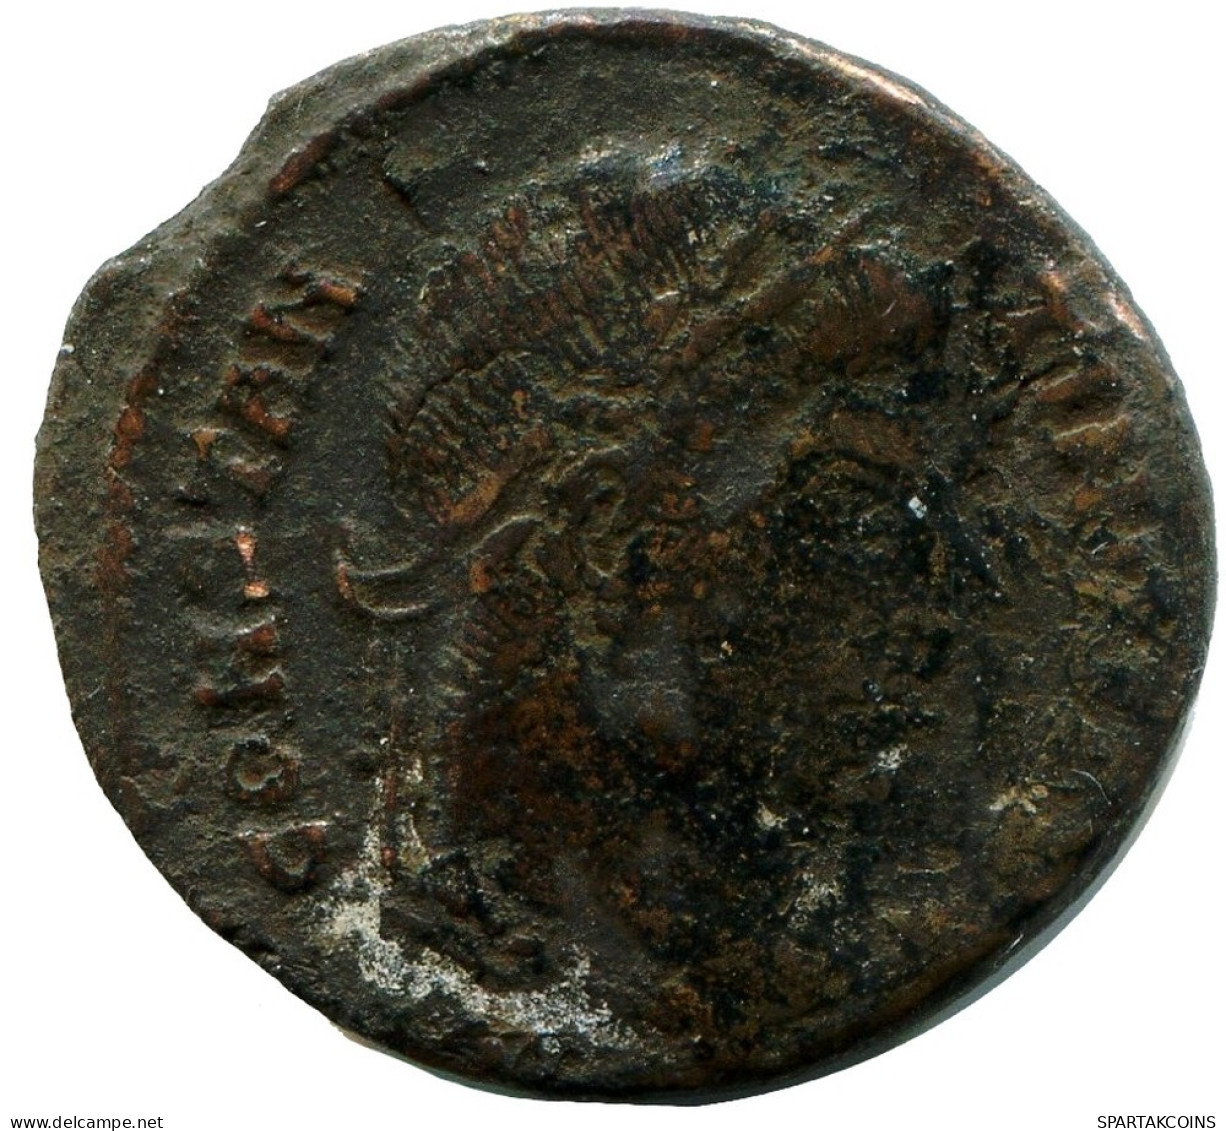 CONSTANTINE I MINTED IN ROME ITALY FOUND IN IHNASYAH HOARD EGYPT #ANC11156.14.E.A - El Impero Christiano (307 / 363)